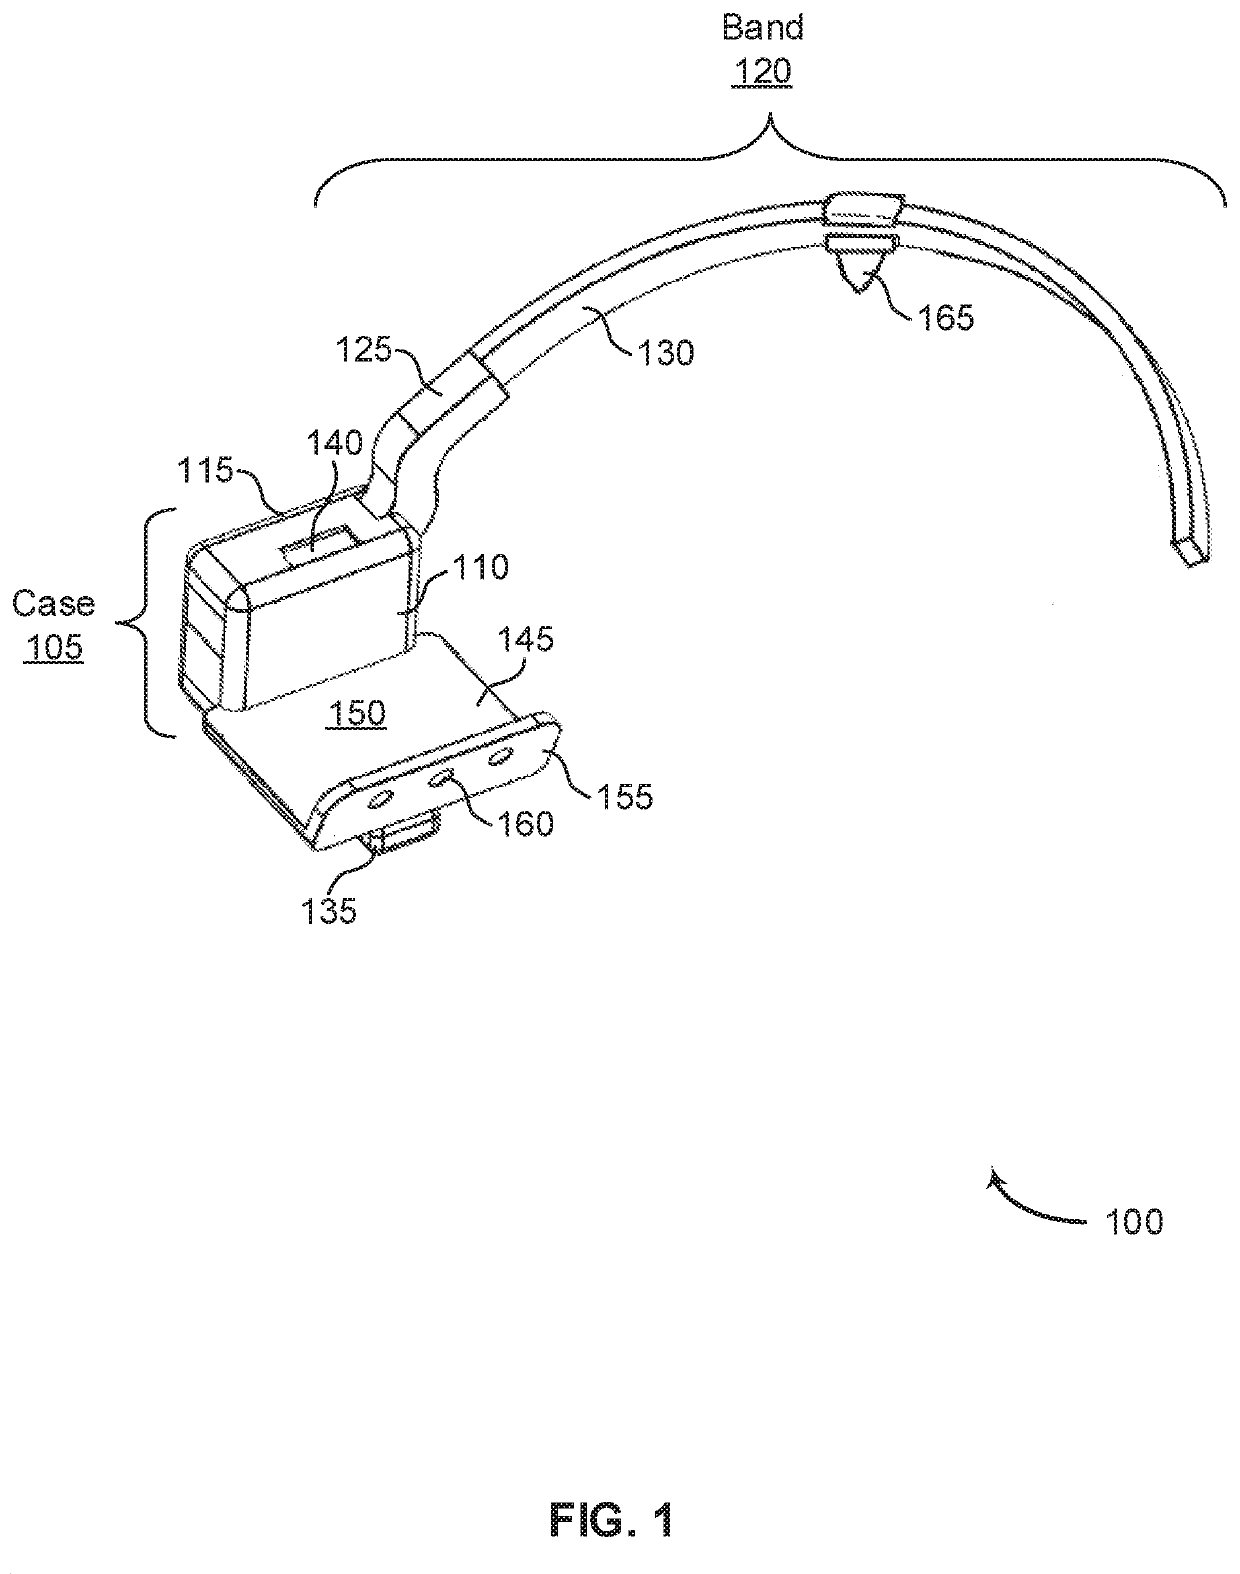 Mouth-operated moveable apparatus